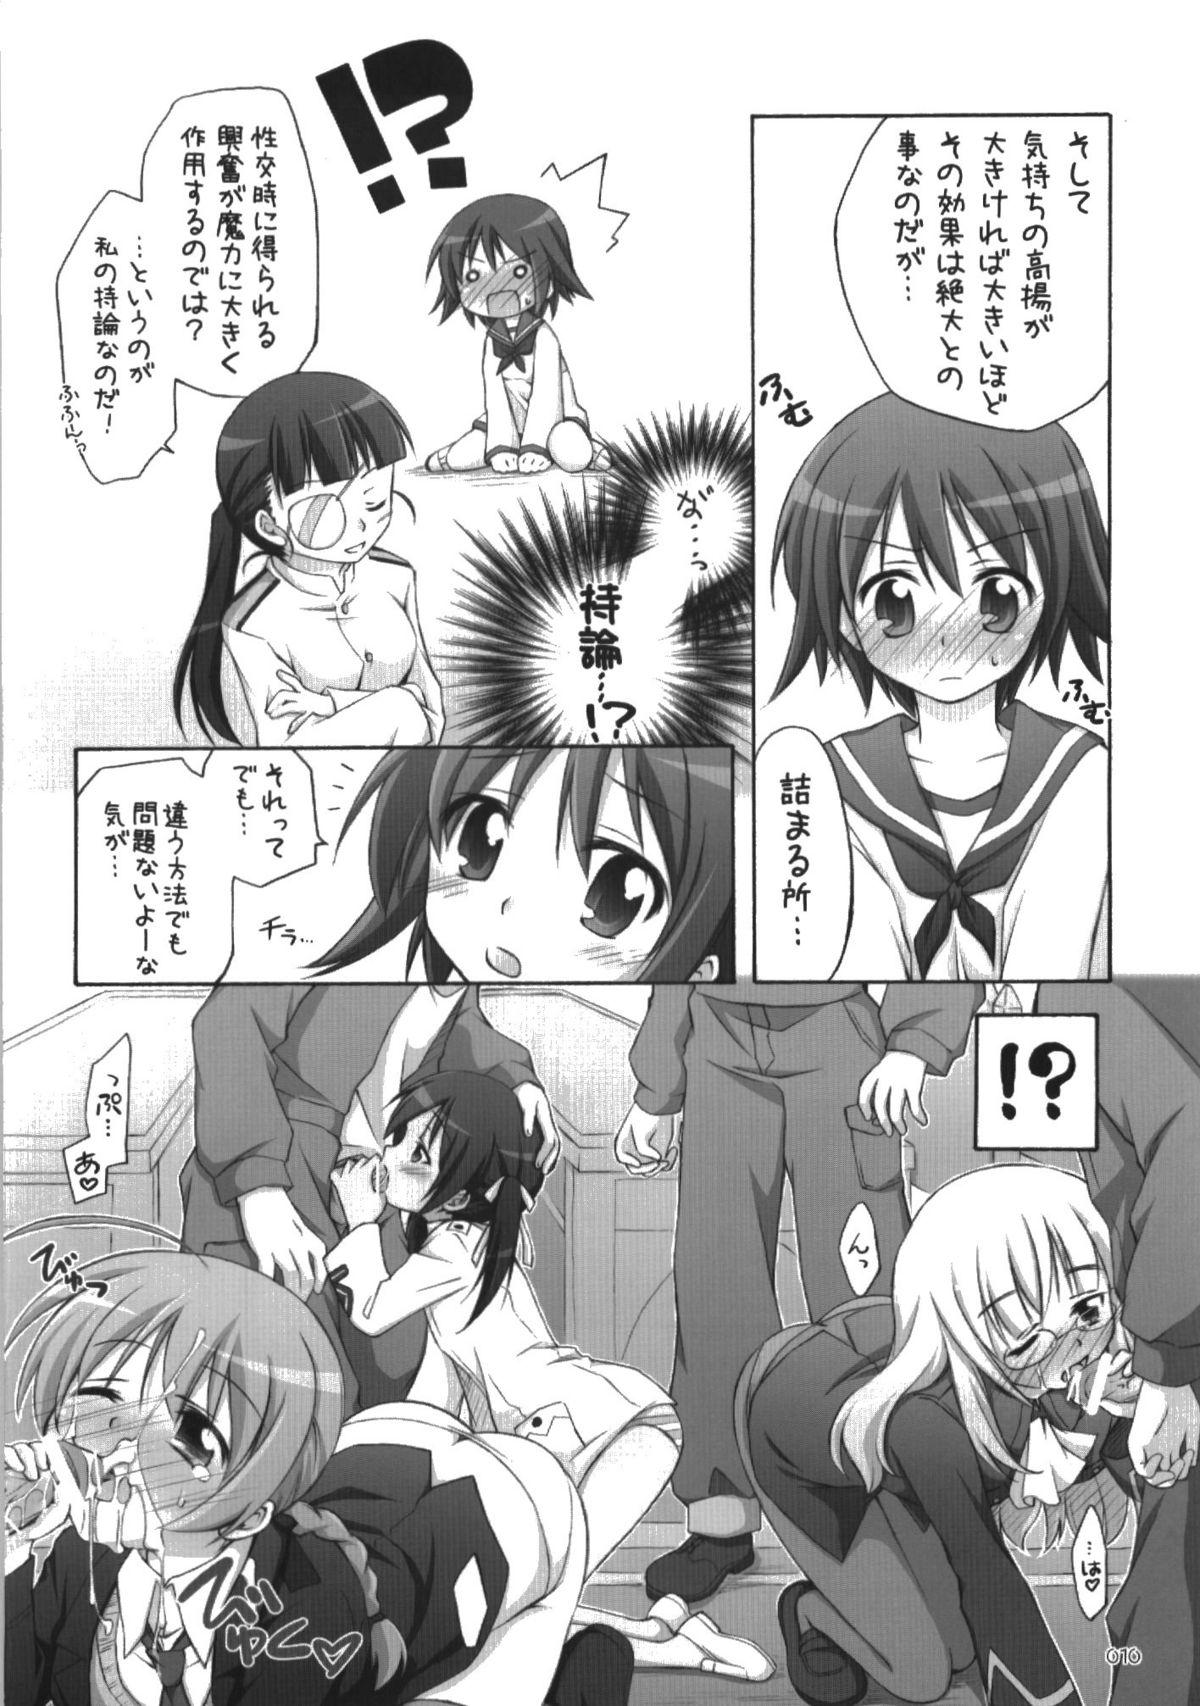 Transvestite s.n.e.g? - Strike witches Culo - Page 10